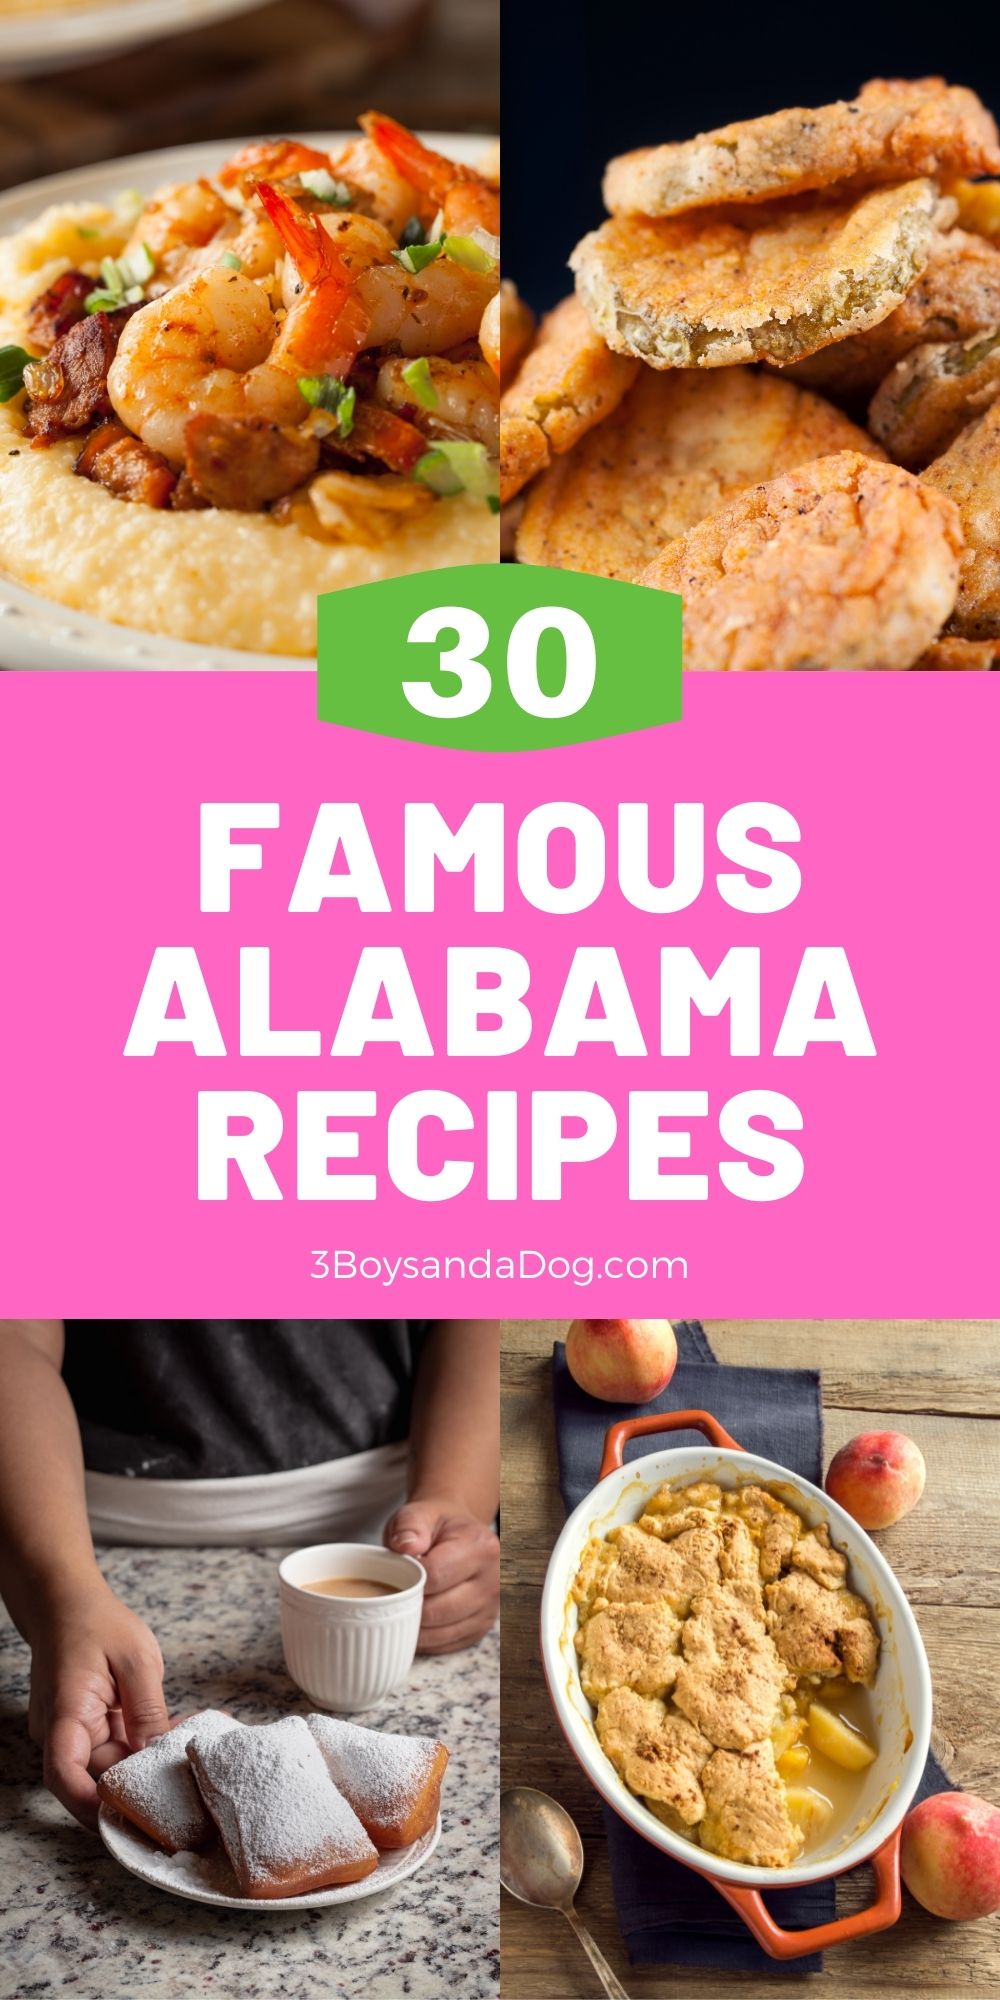 recipes Alabama is known for